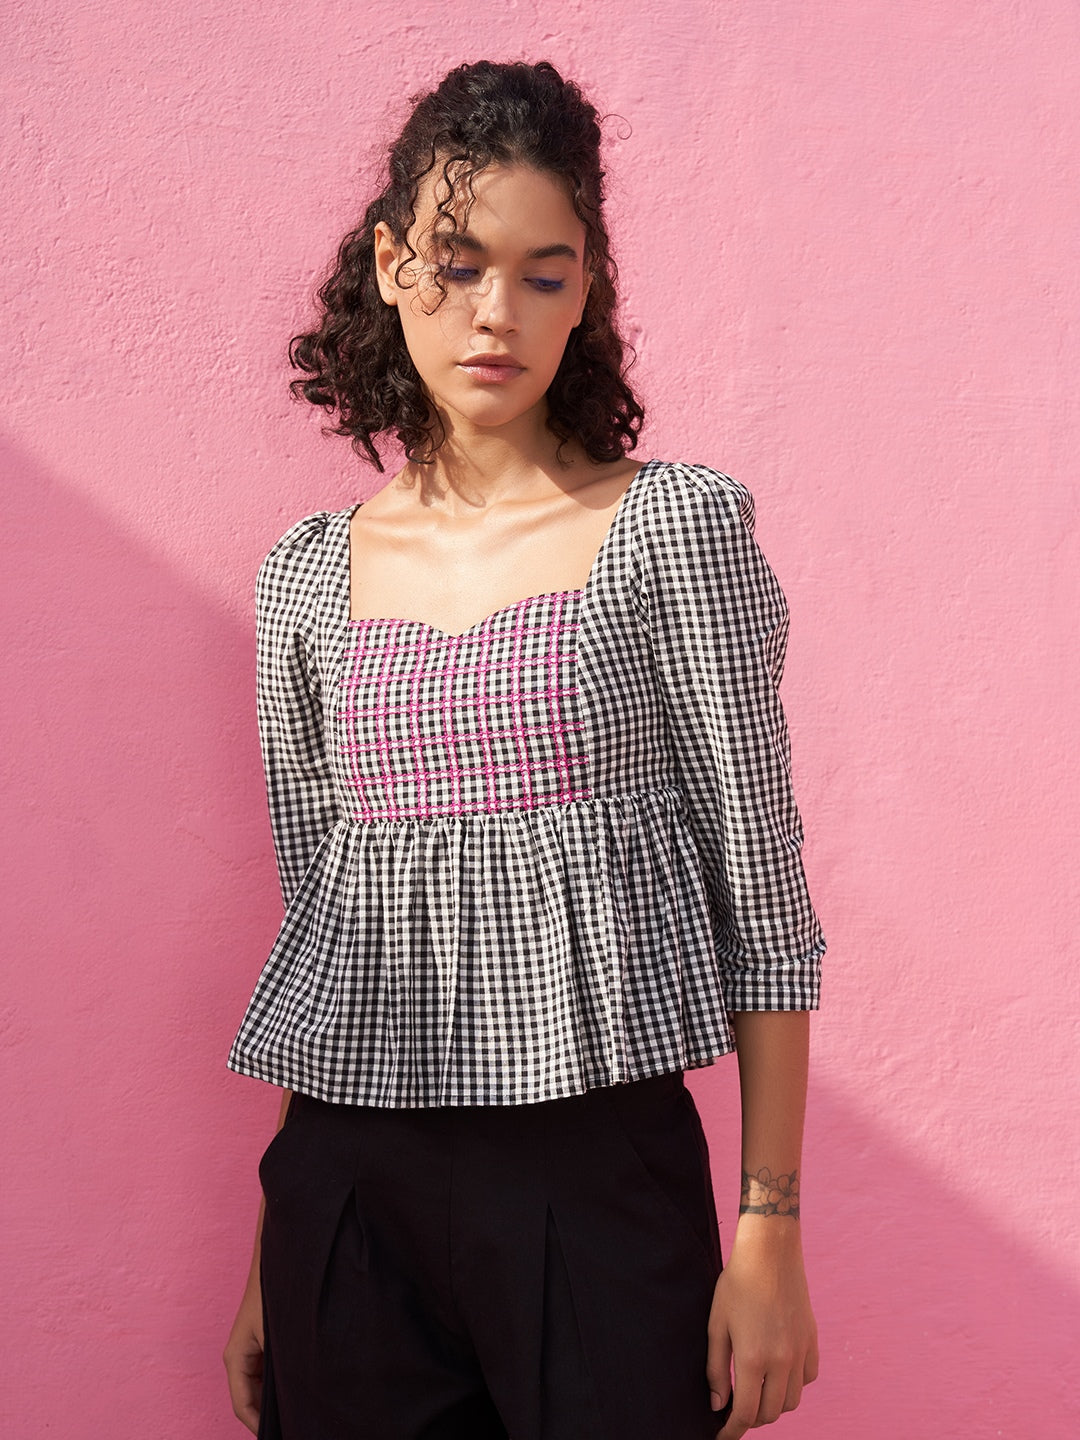 Peplum Top in Gingham Checks with Sweetheart Neckline | Relove